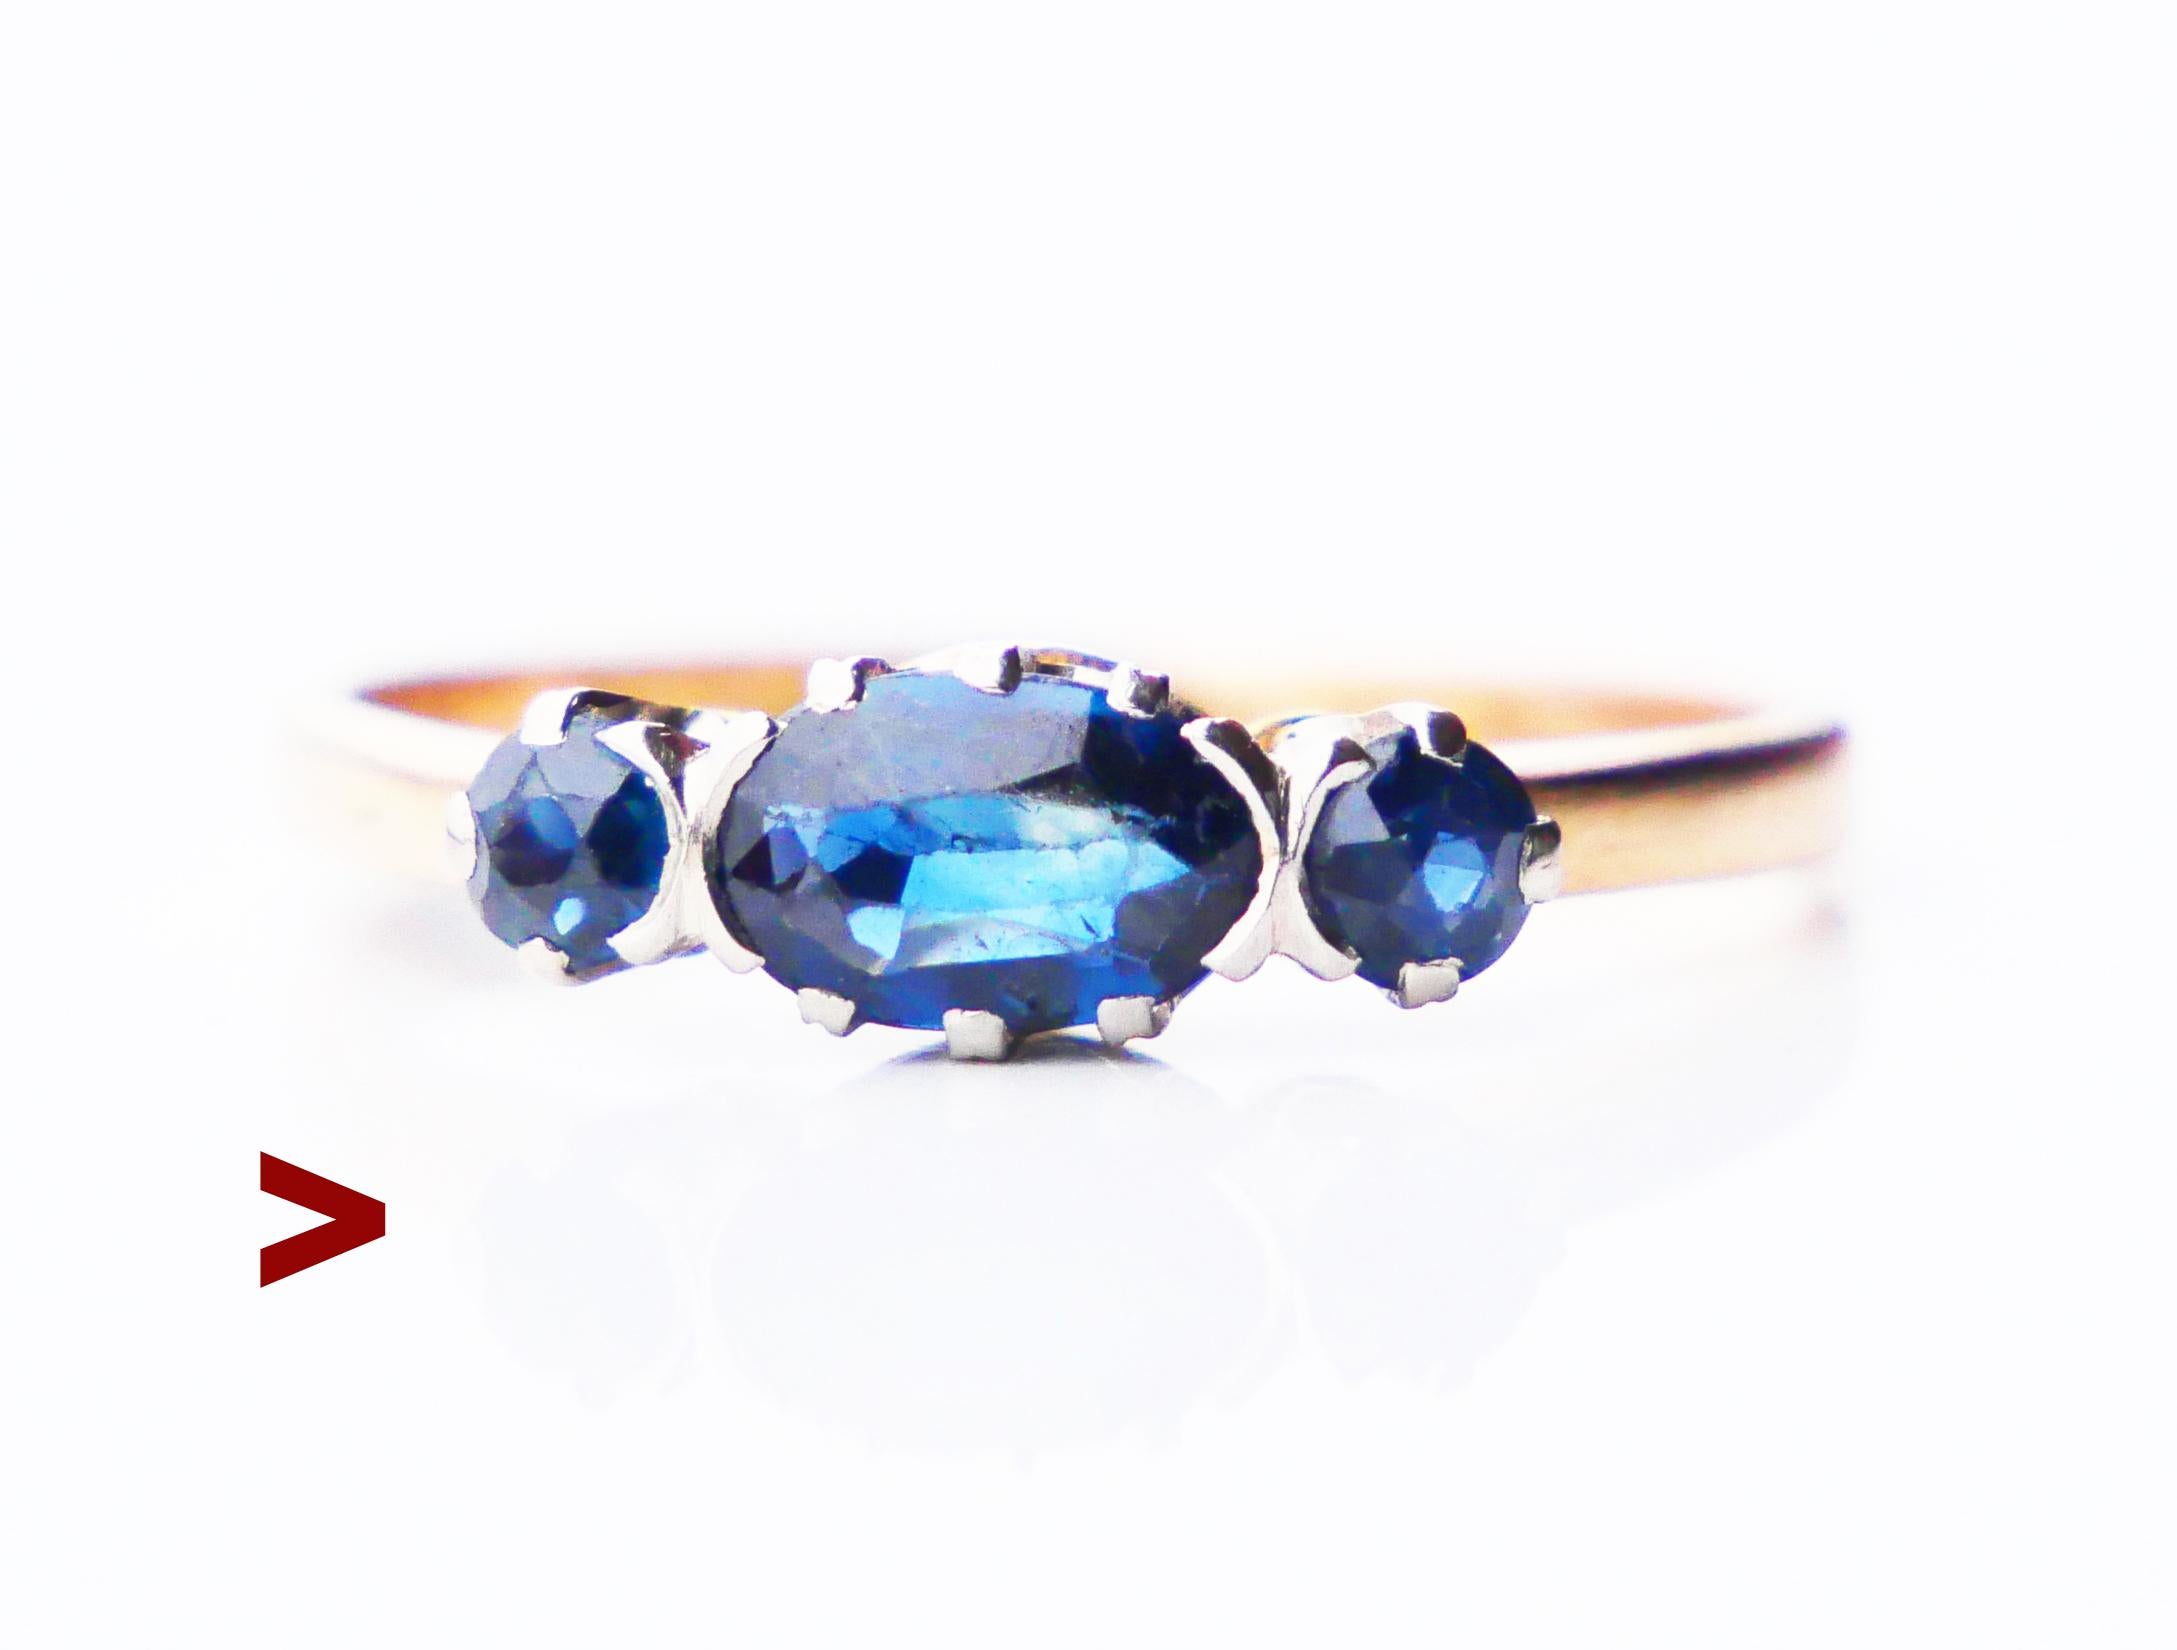 A Ring to admire since 1942. 18K Yellow Gold band and crown, top settings in White Gold with three natural Blue Sapphires : central oval diamond cut 7 mm x 5 mm x 2.5 mm deep / ca. 1 ct and two old diamond cuts Ø 3mm / ca. 0.15 ct each. All three of